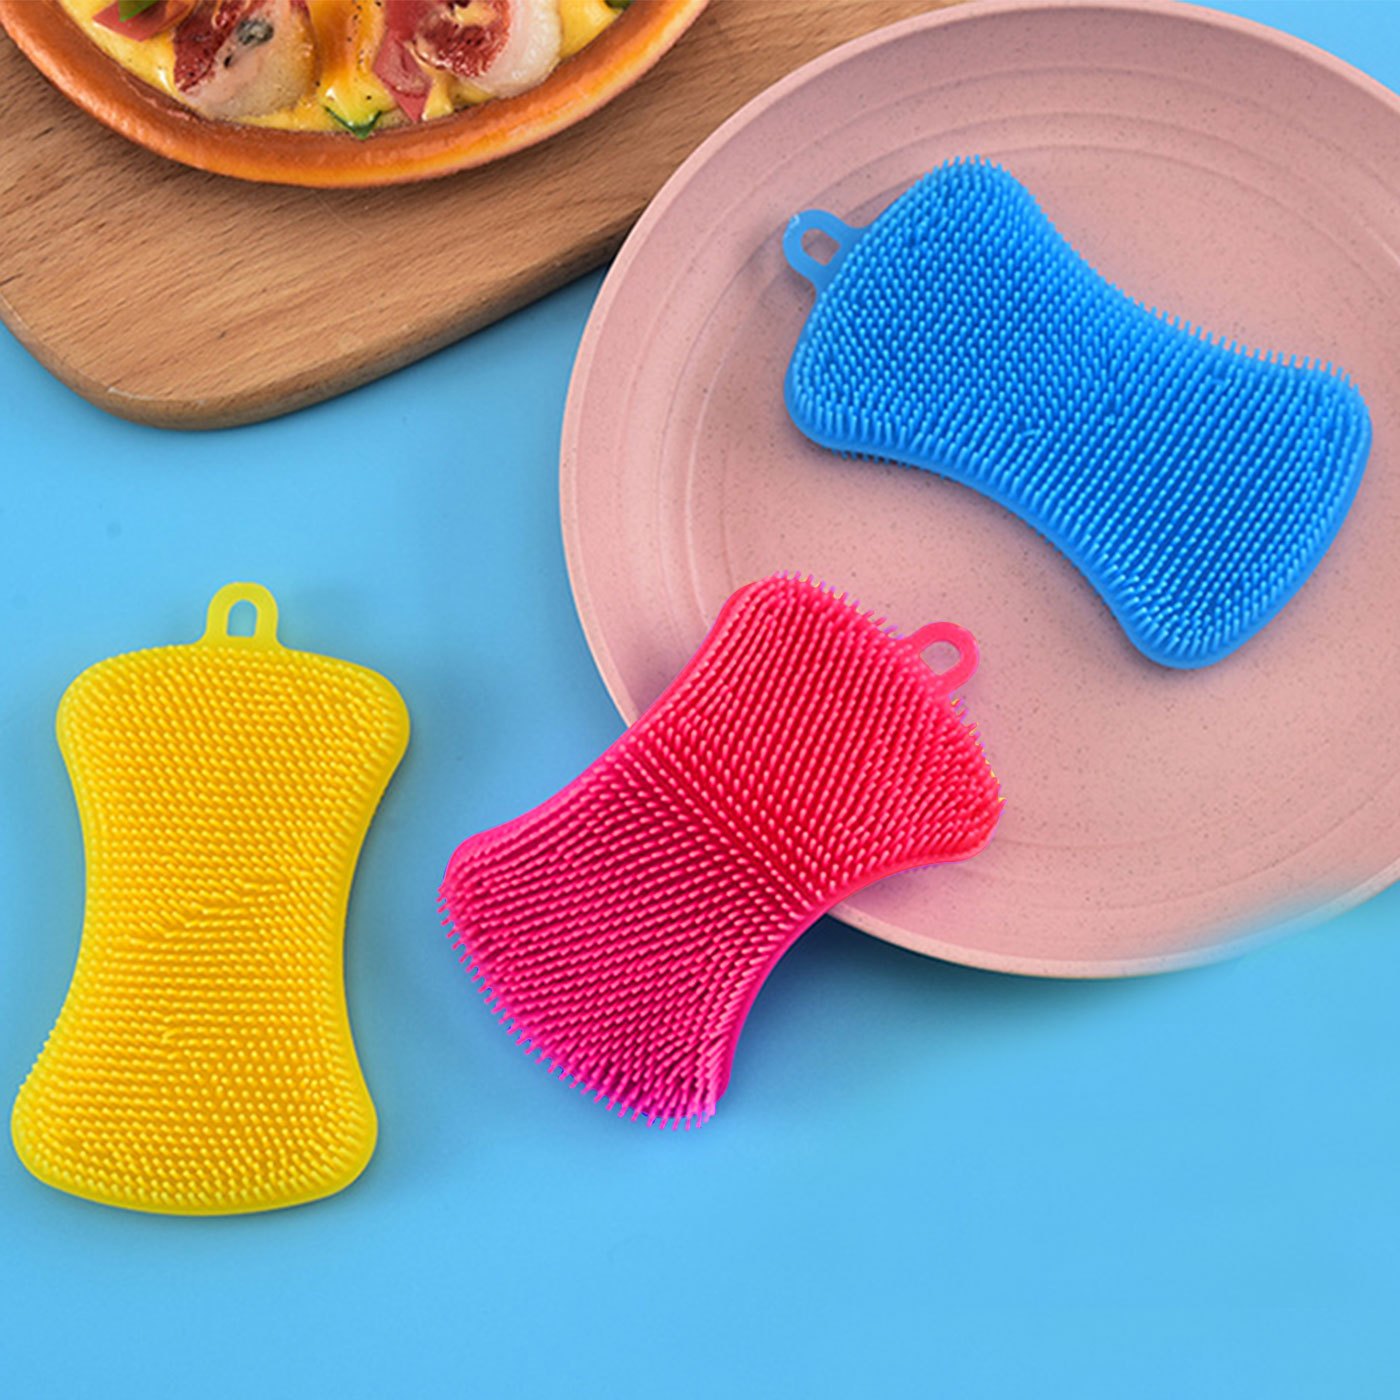 Silicone Sponge Dish Washing Kitchen Scrubber - Magic Food-Grade Dishes  Multipurpose Better Sponges Non Stick Cleaning Smart Kitchen Gadgets Brush  Accessories-3pcs 